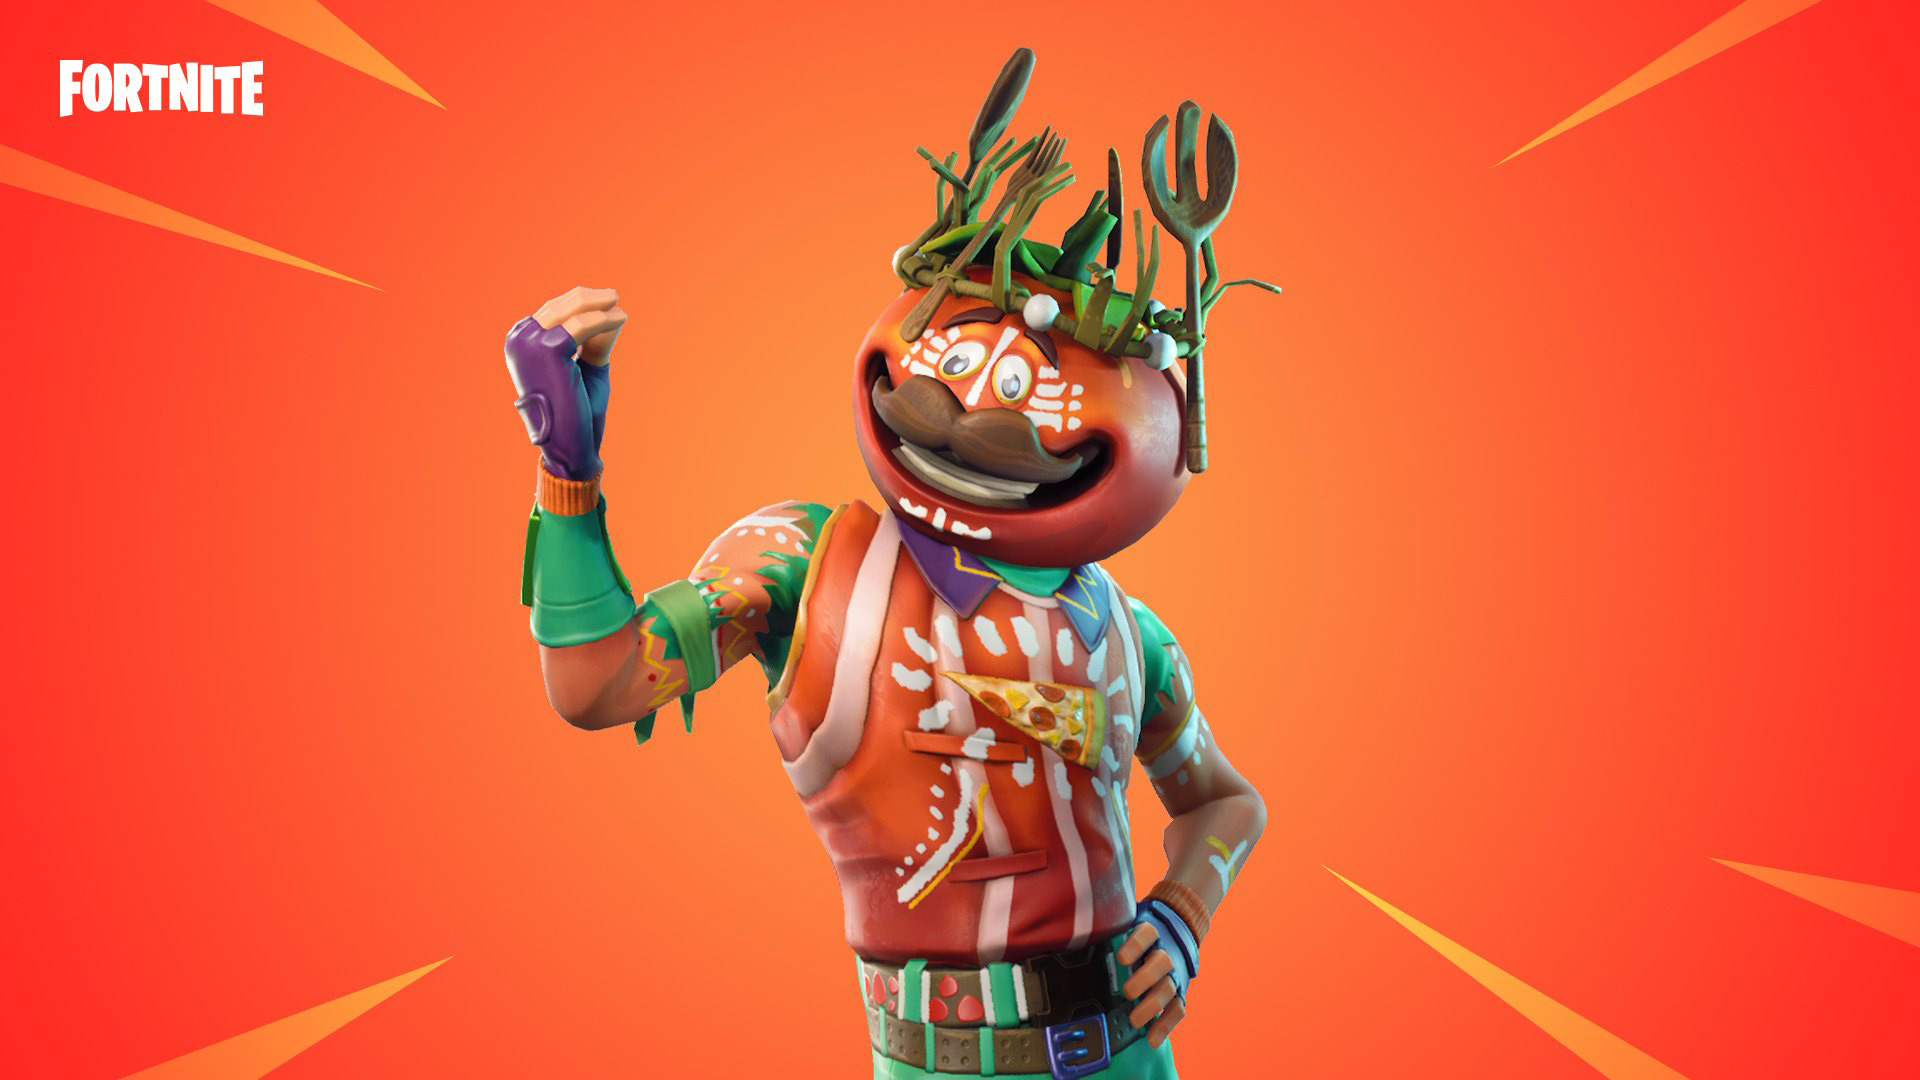 Fortnite Tomatohead Skin Outfit Pngs Image Pro Game Guides